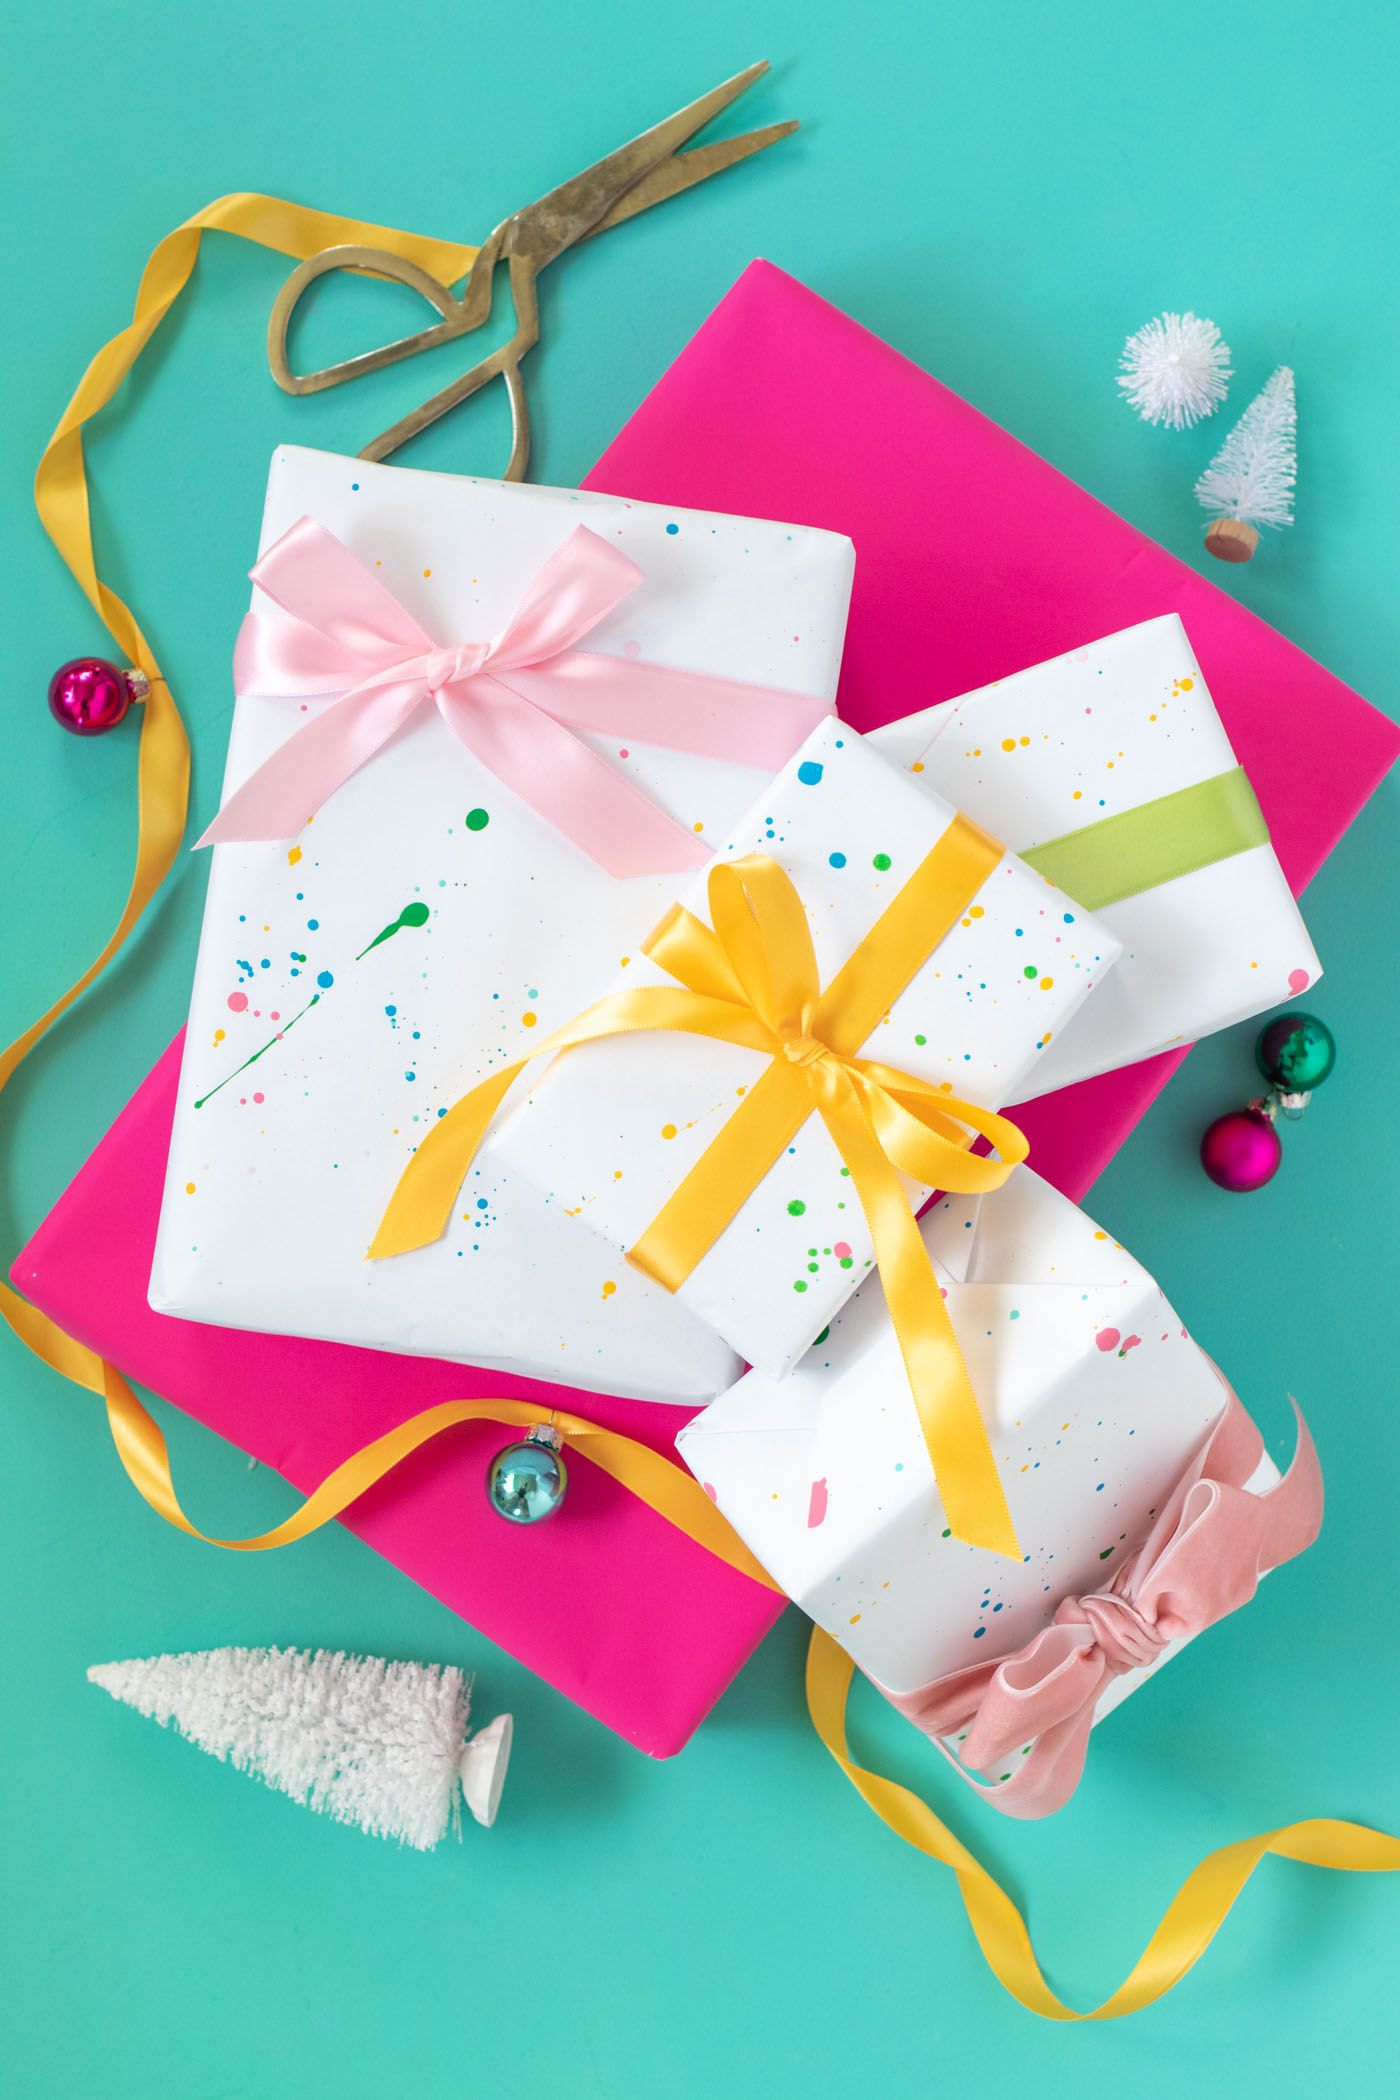 Creative Ways to Wrap Gifts | 10 Unique Gift Wrapping Ideas